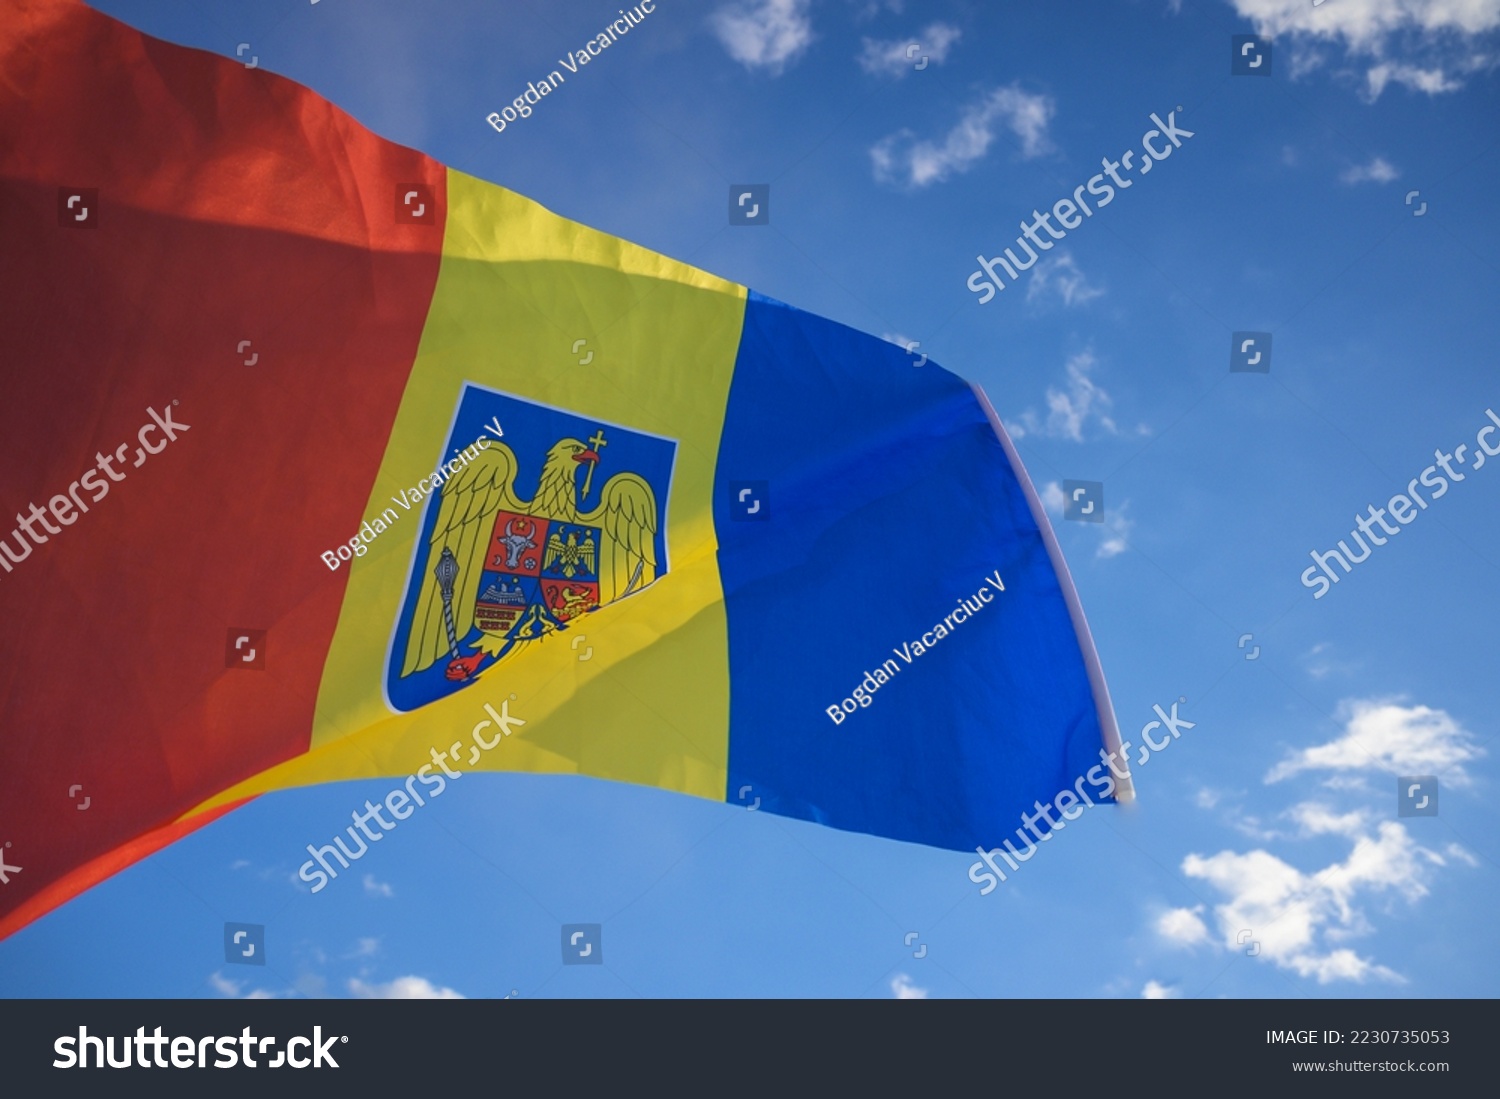 The Romanian flag fluttered in the wind with the blue sky in the background. December, 01- National Day of Romania. #2230735053